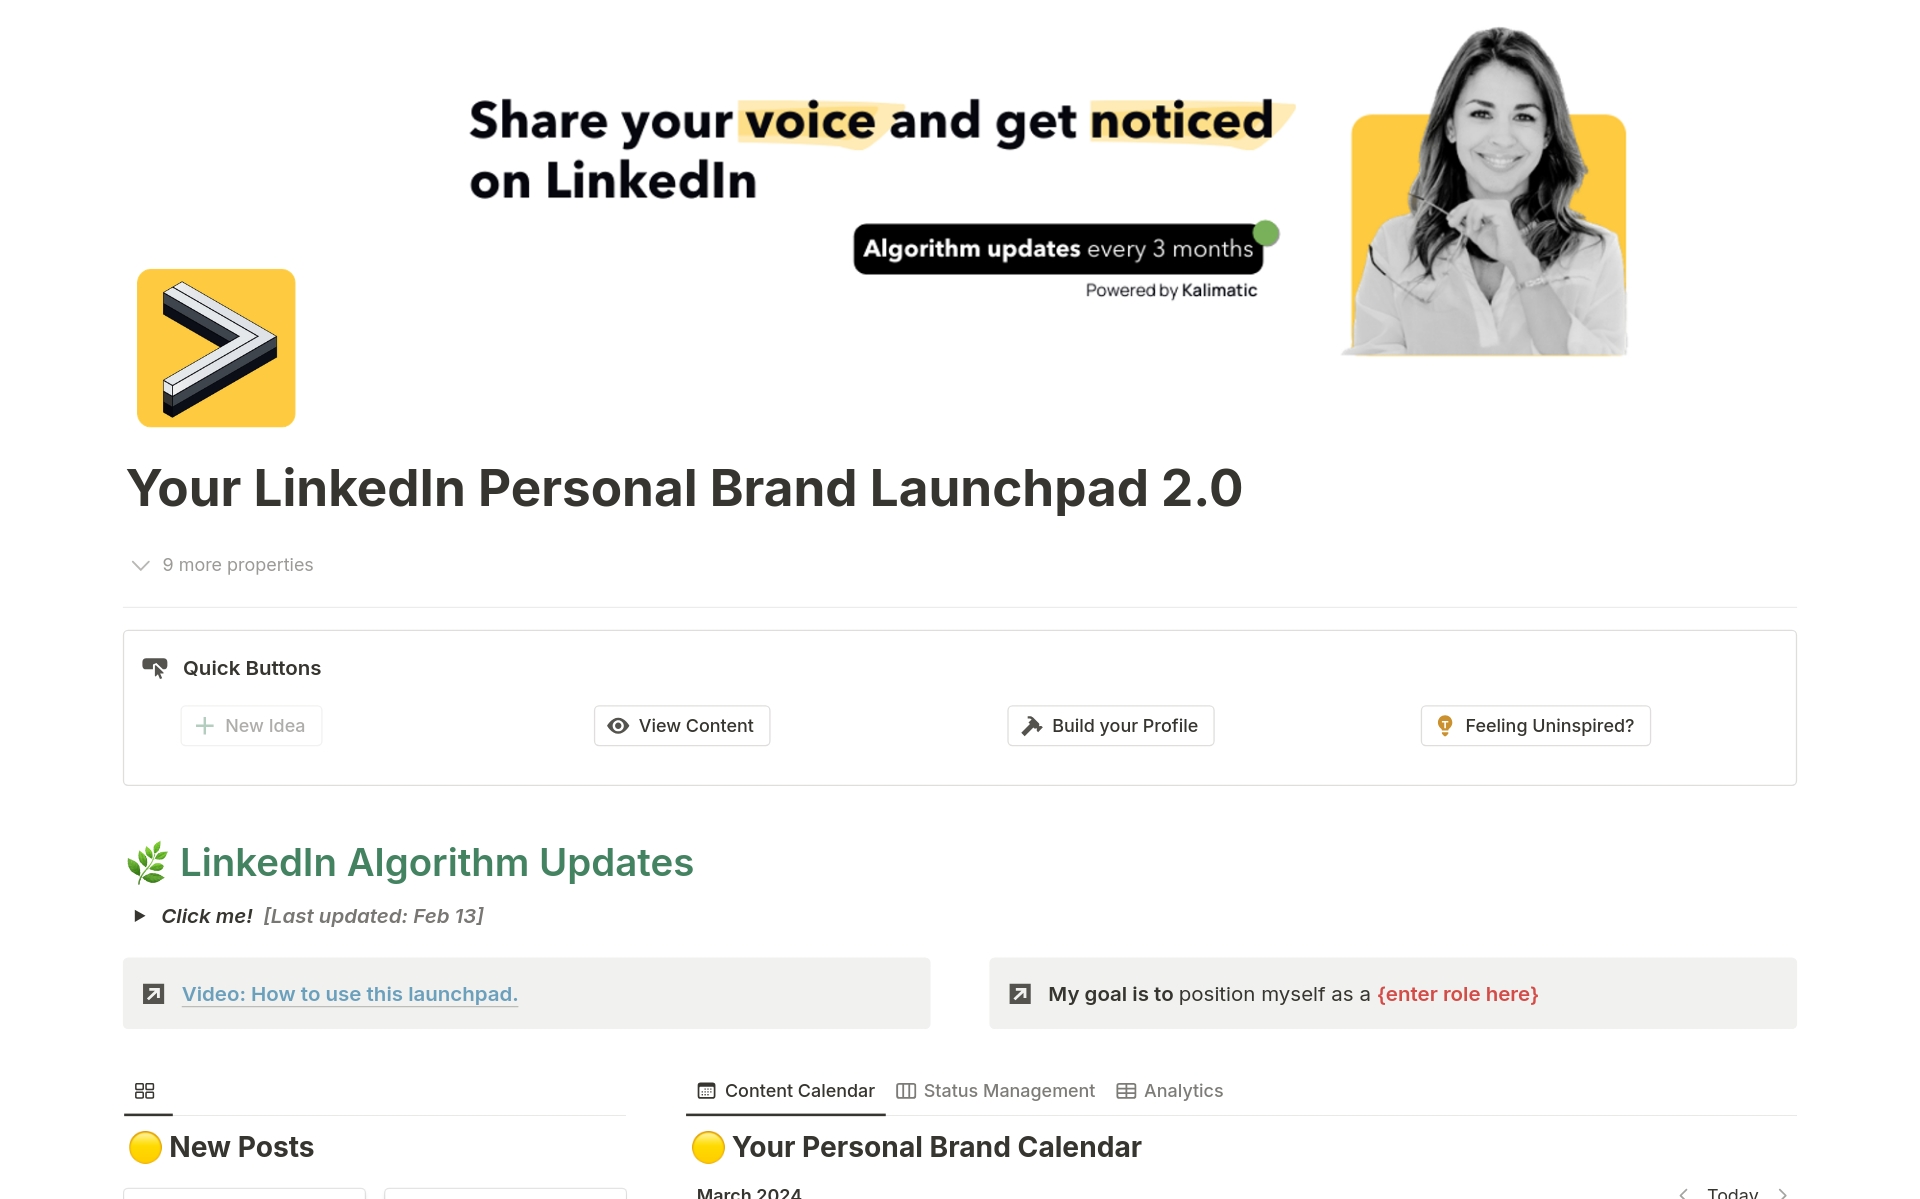 Standing out on LinkedIn has never been more rewarding. With the Personal Brand Launchpad 2.0, you'll have everything you need to build a powerful online brand and increase your visibility.

Get noticed now!